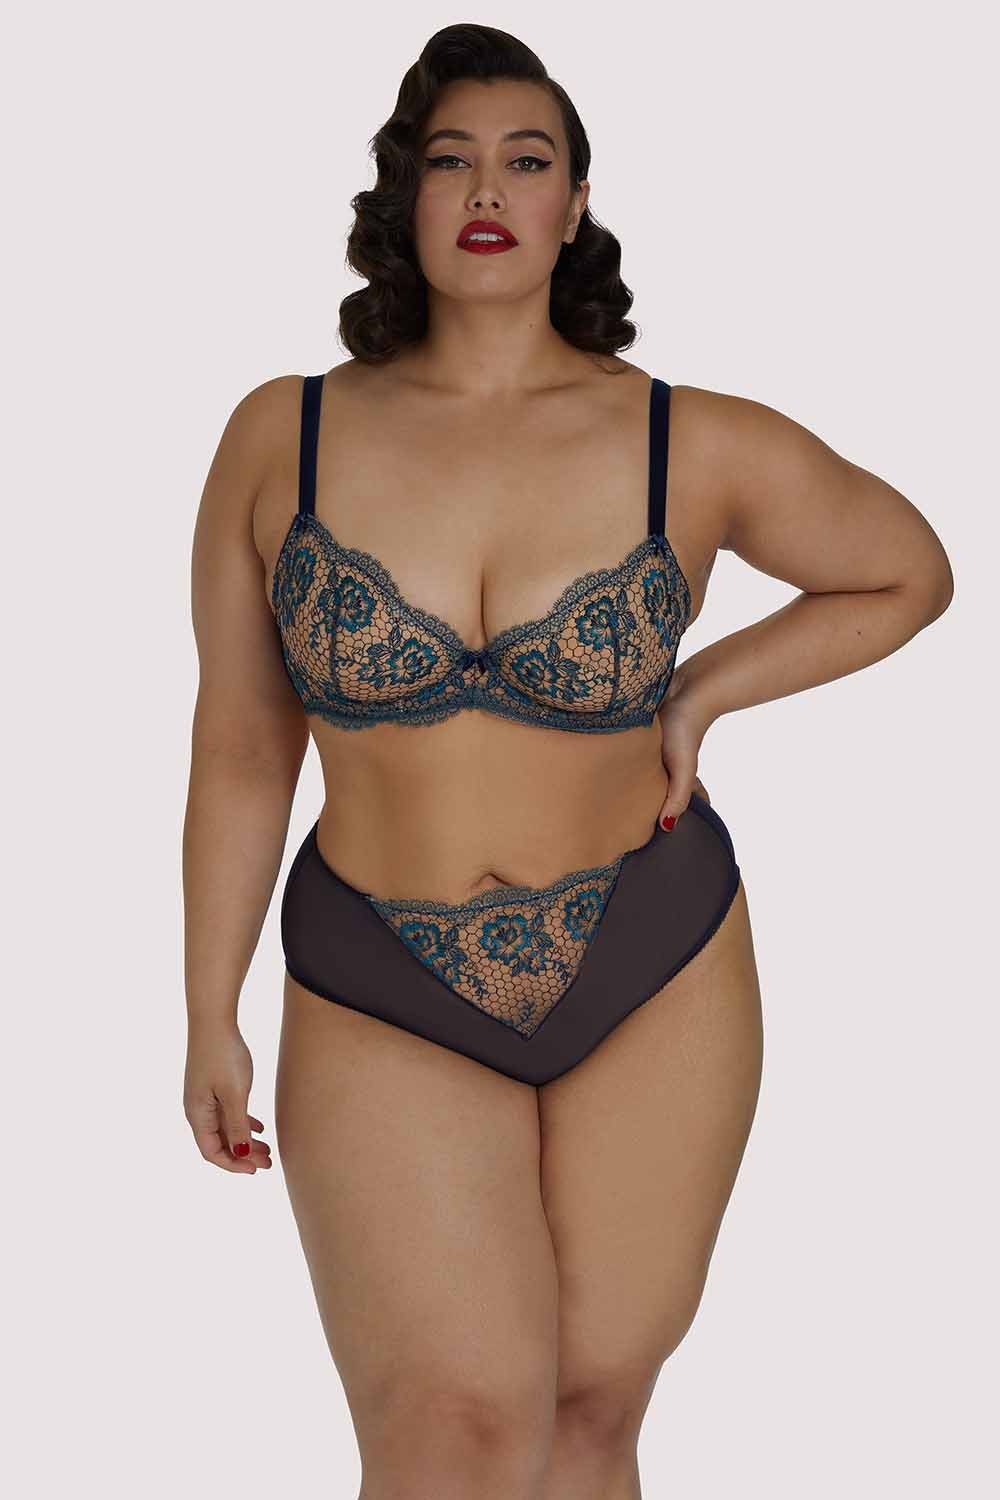 Midnightdivas - Fashion Bra ❤ Wear it in 6 different ways! This fantastic  Deep U low cut bra is a must-have item in every girl's lingerie closet.  Elegant and Sexy, this multifunctional